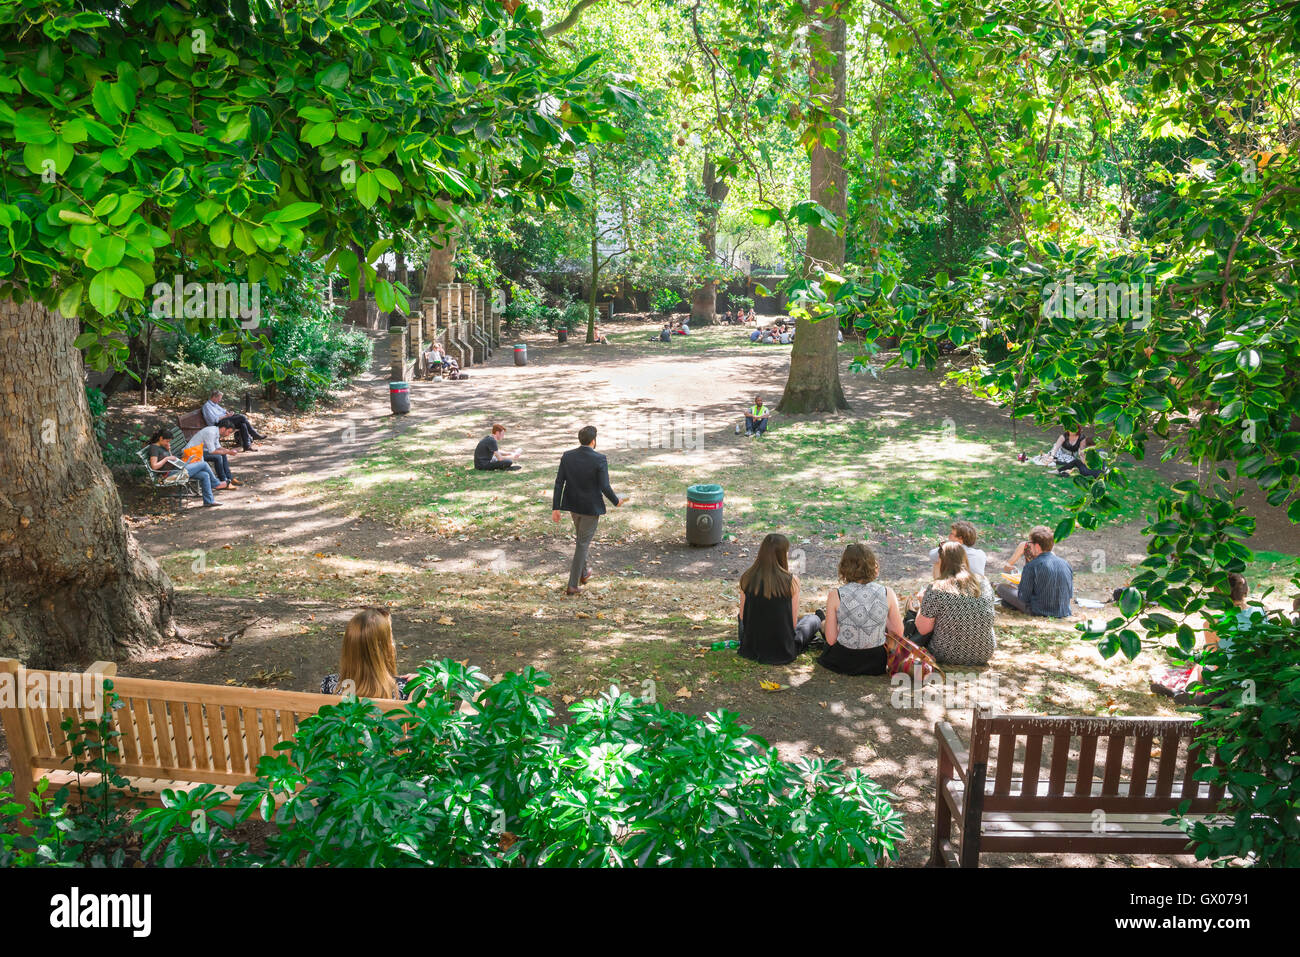 London garden square, view of people in summer relaxing in the Malet Street Gardens in Bloomsbury at lunch-time, central London, UK. Stock Photo